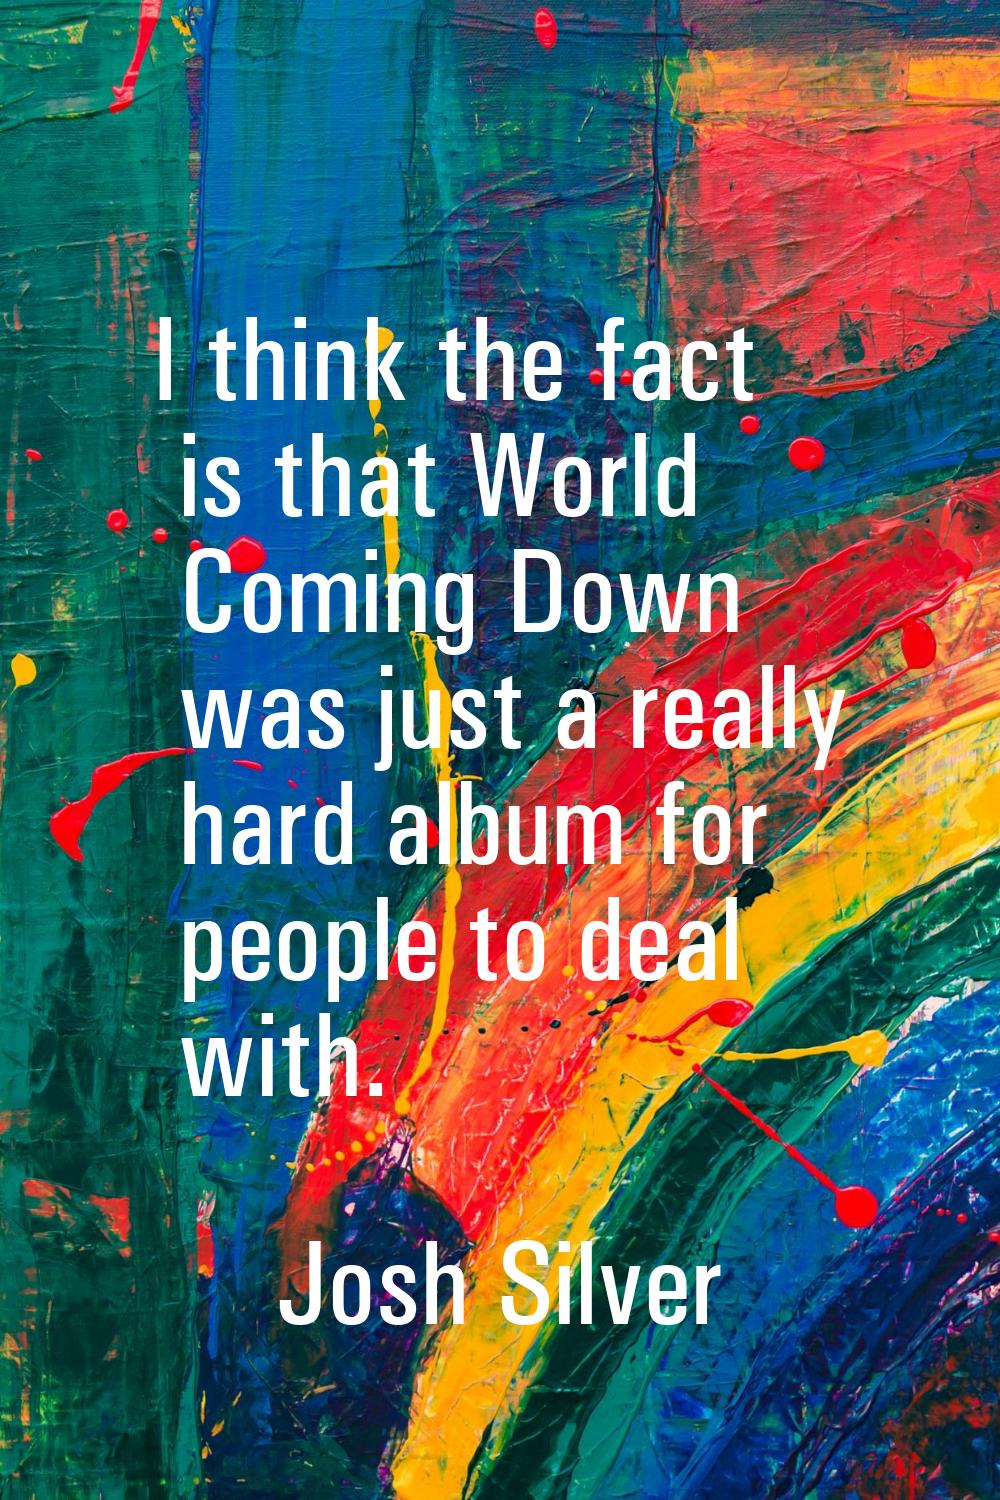 I think the fact is that World Coming Down was just a really hard album for people to deal with.